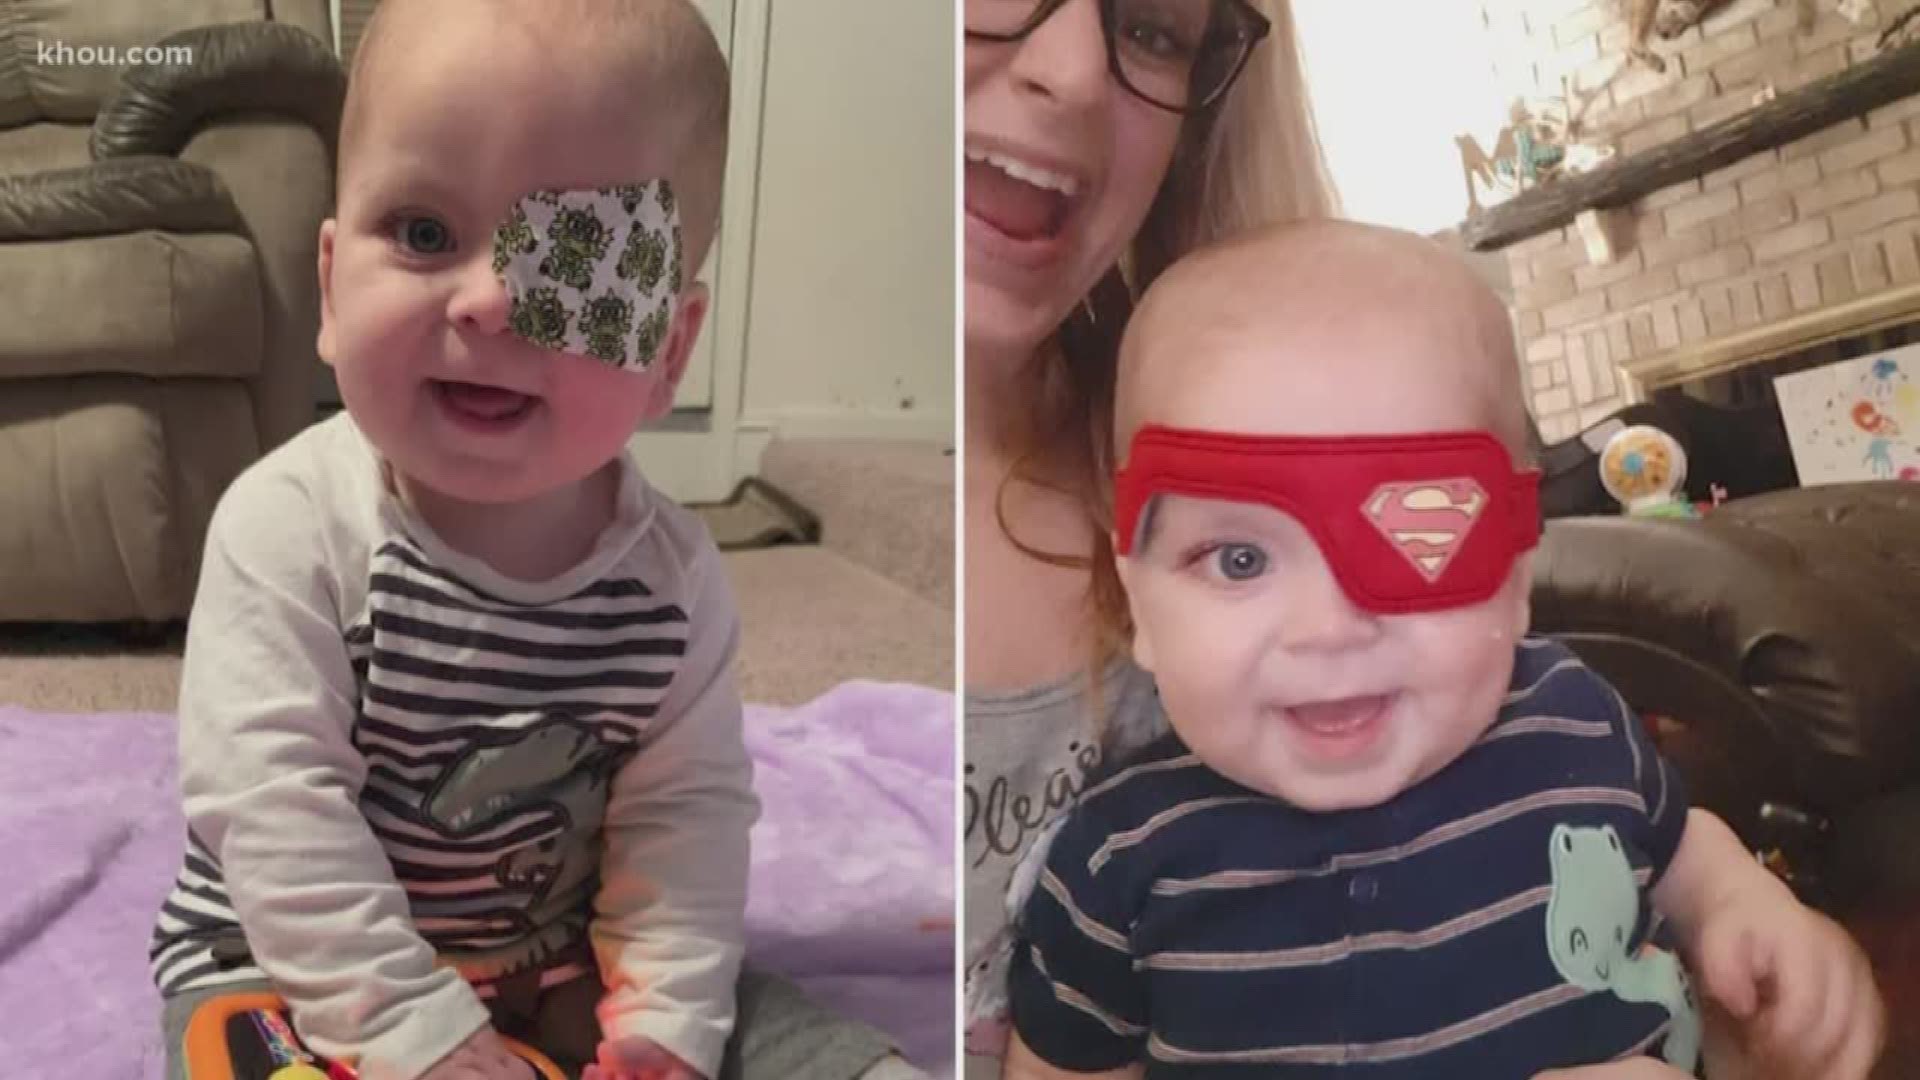 Doctors diagnosed the baby with bilateral retinoblastoma, meaning he has tumors in both of his eyes. Within a week, the family was in New York seeing a specialist.